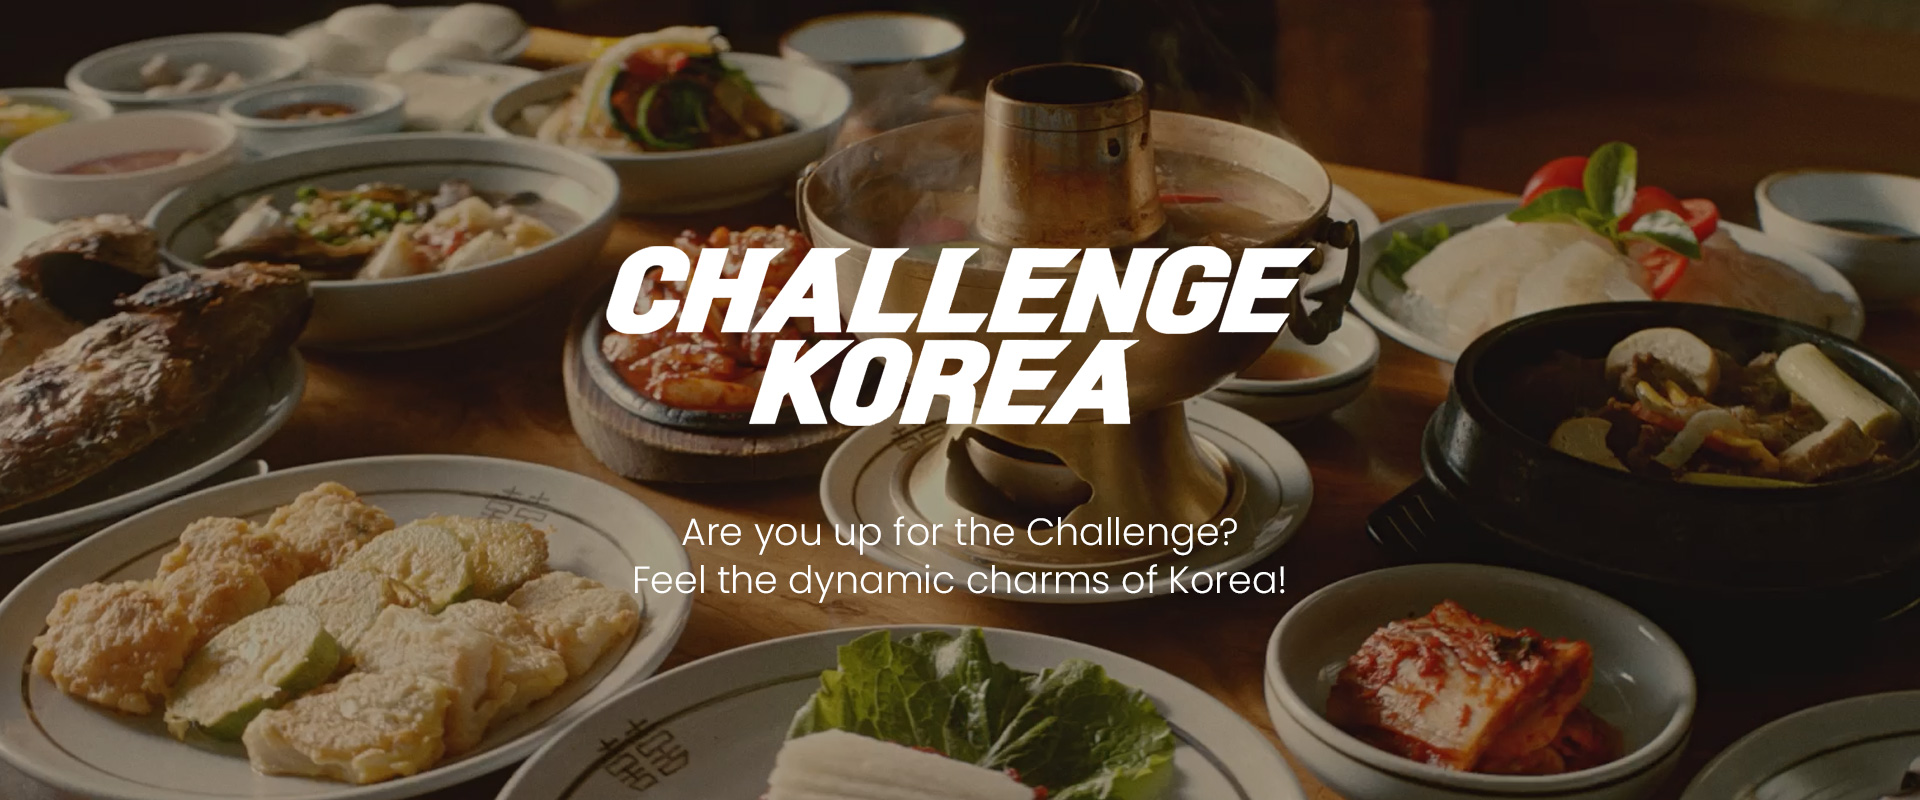 Challenge Korea - Are you up for the challenge? Feel the dynamic charms of Korea!